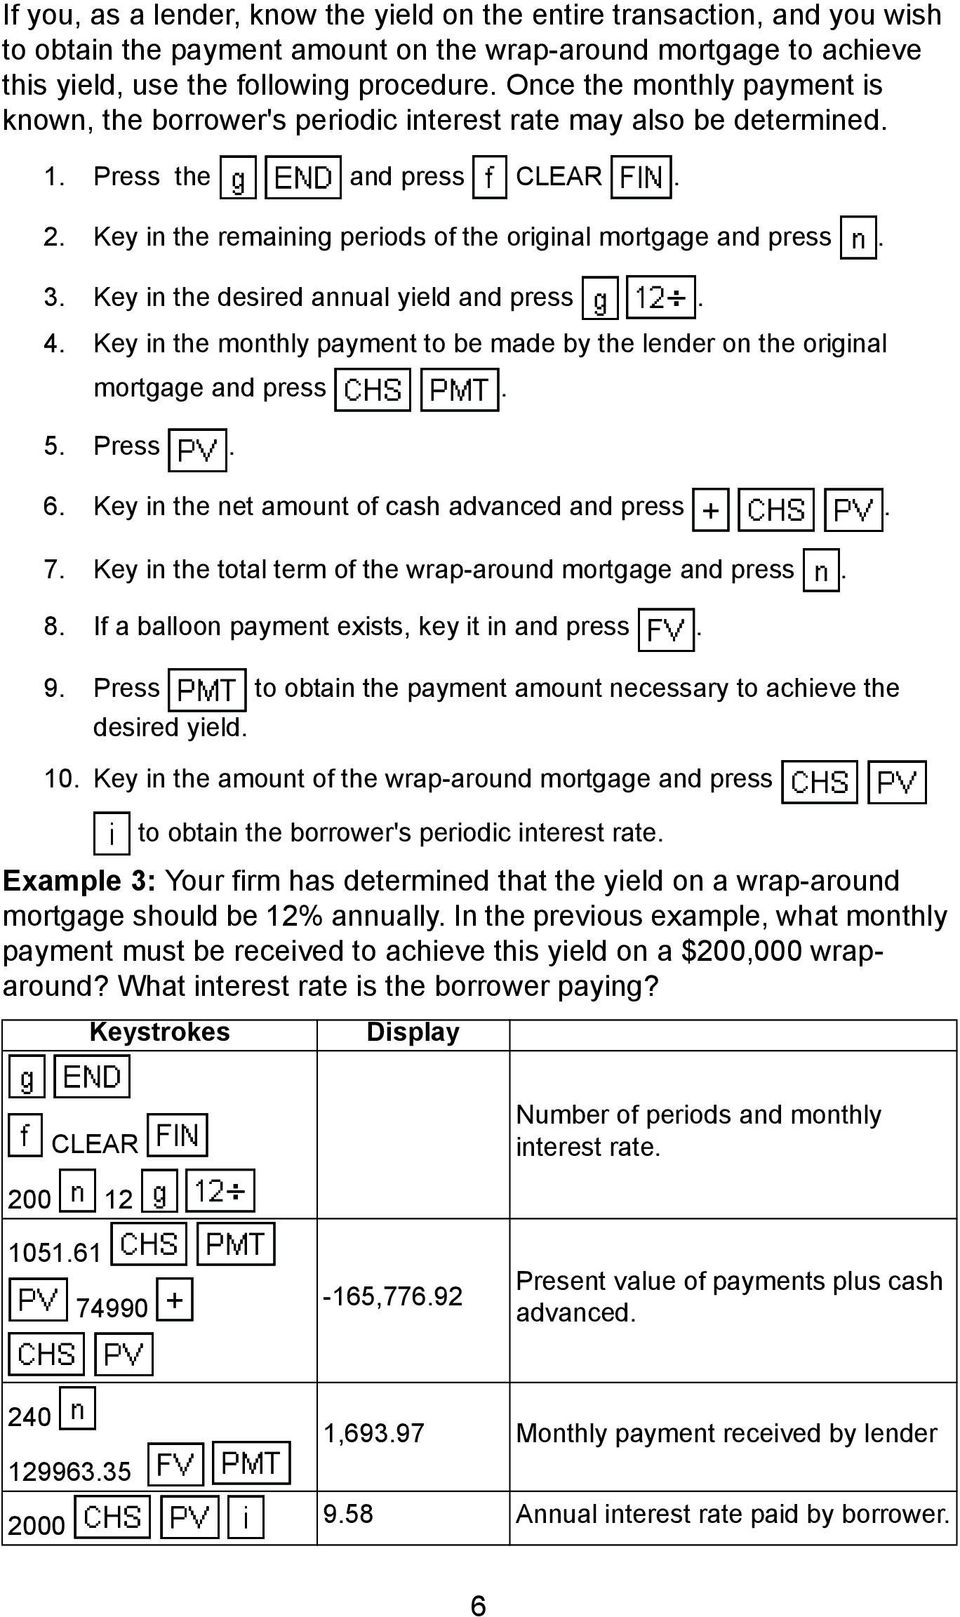 Key in the desired annual yield and press. 4. Key in the monthly payment to be made by the lender on the original mortgage and press. 5. Press. 6. Key in the net amount of cash advanced and press. 7.